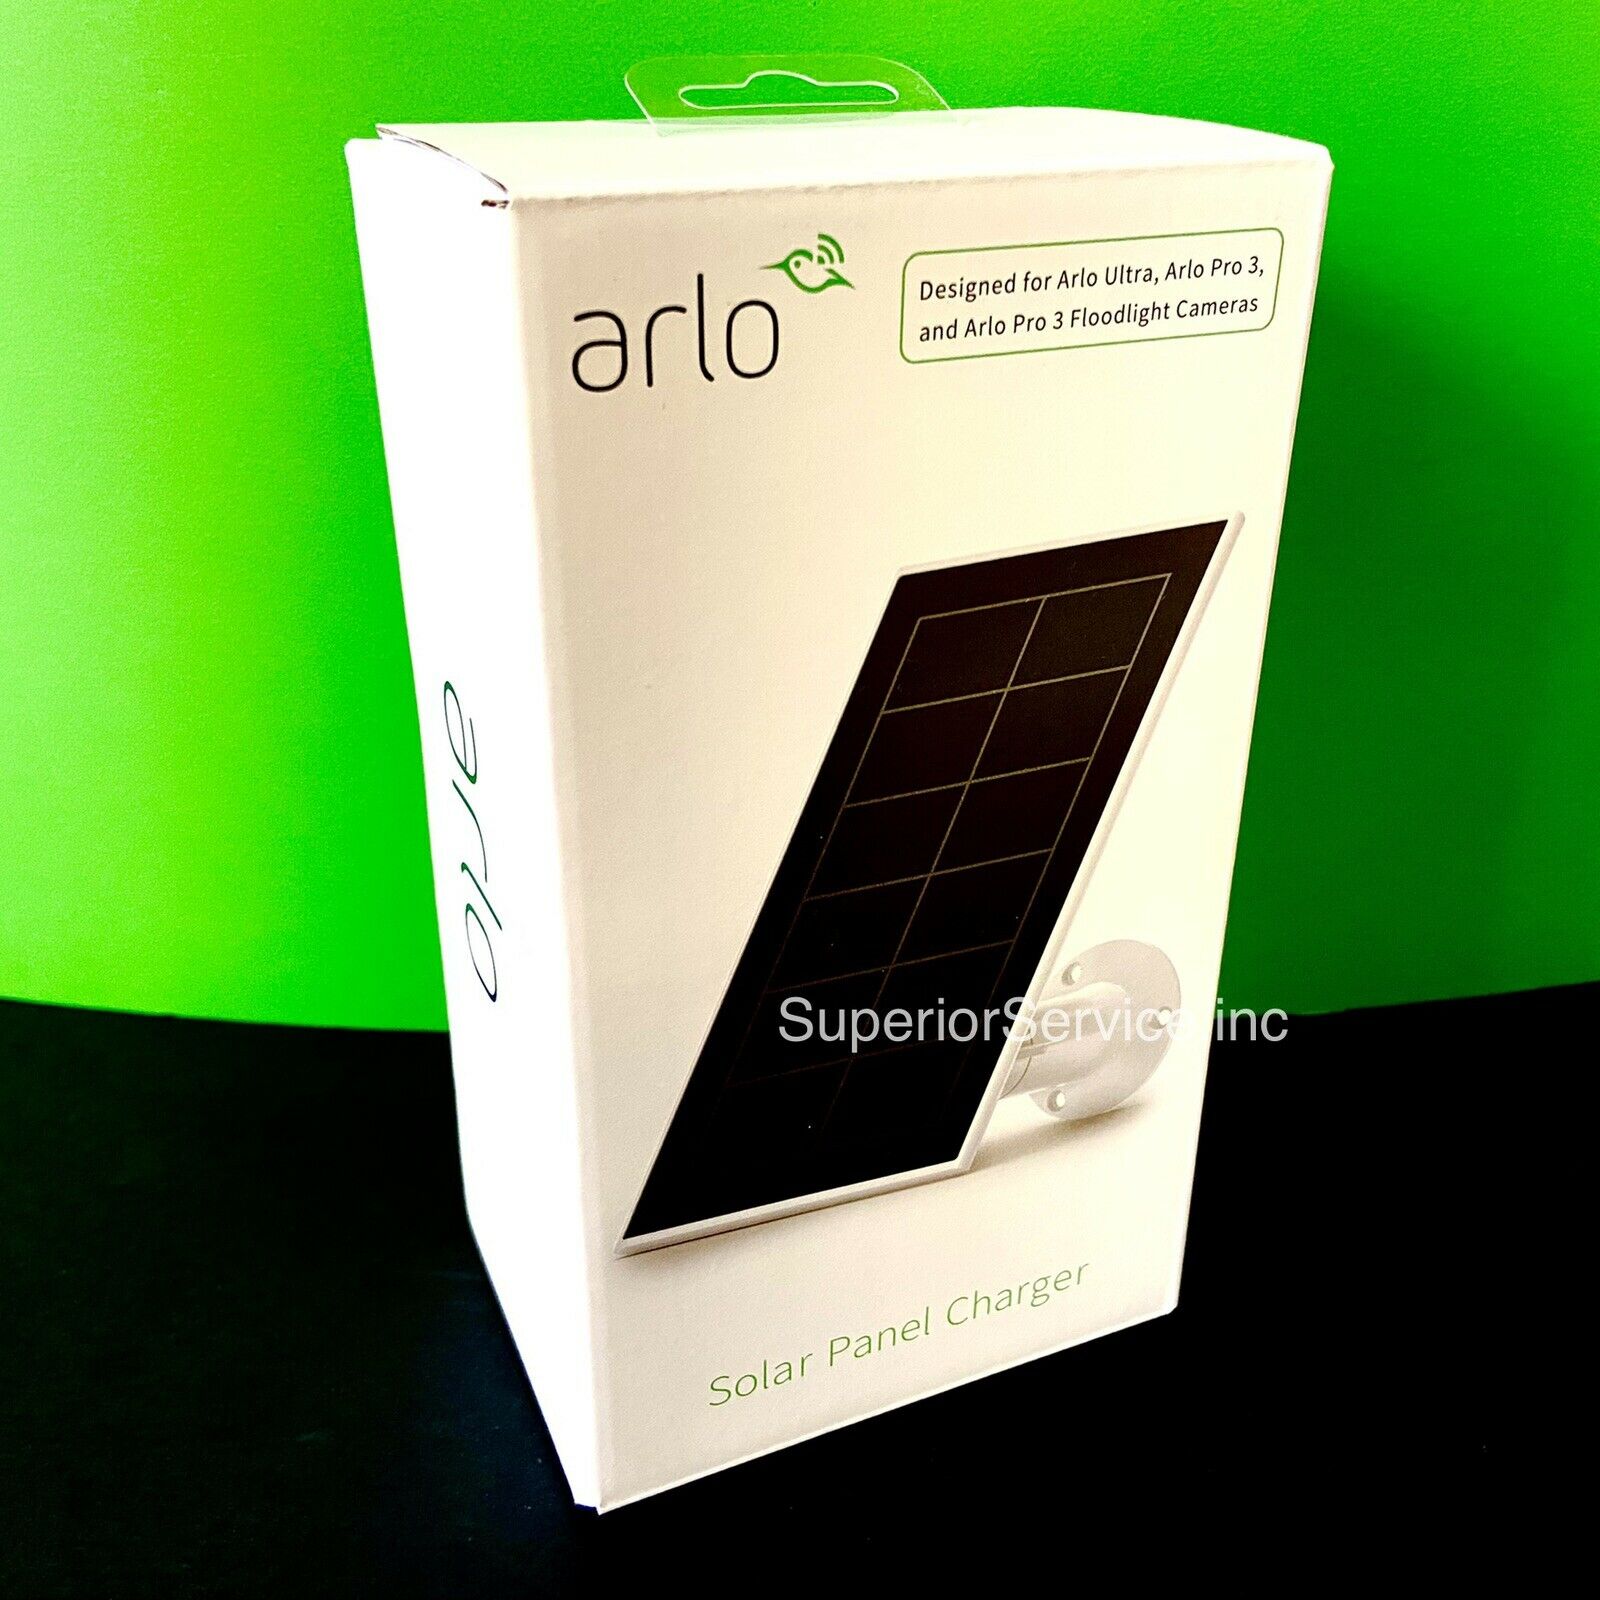 New Arlo Solar Panel Charger For Arlo Ultra 2 And Pro 3 Security Cameras 1.86 W